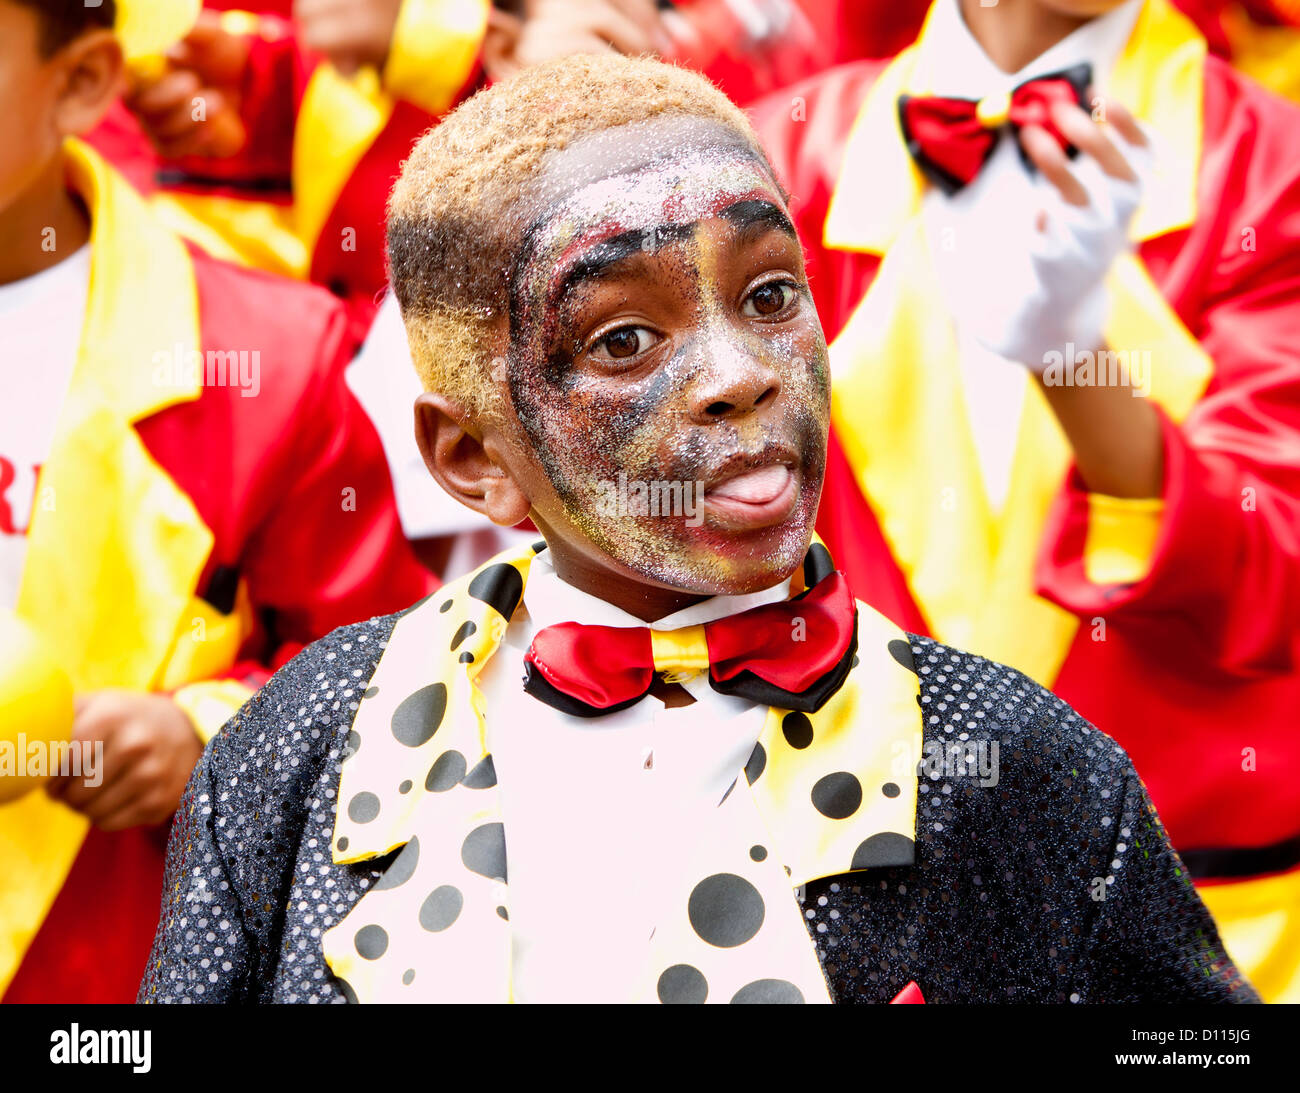 A young entertainer from the minstrel festival in Africa Stock Photo